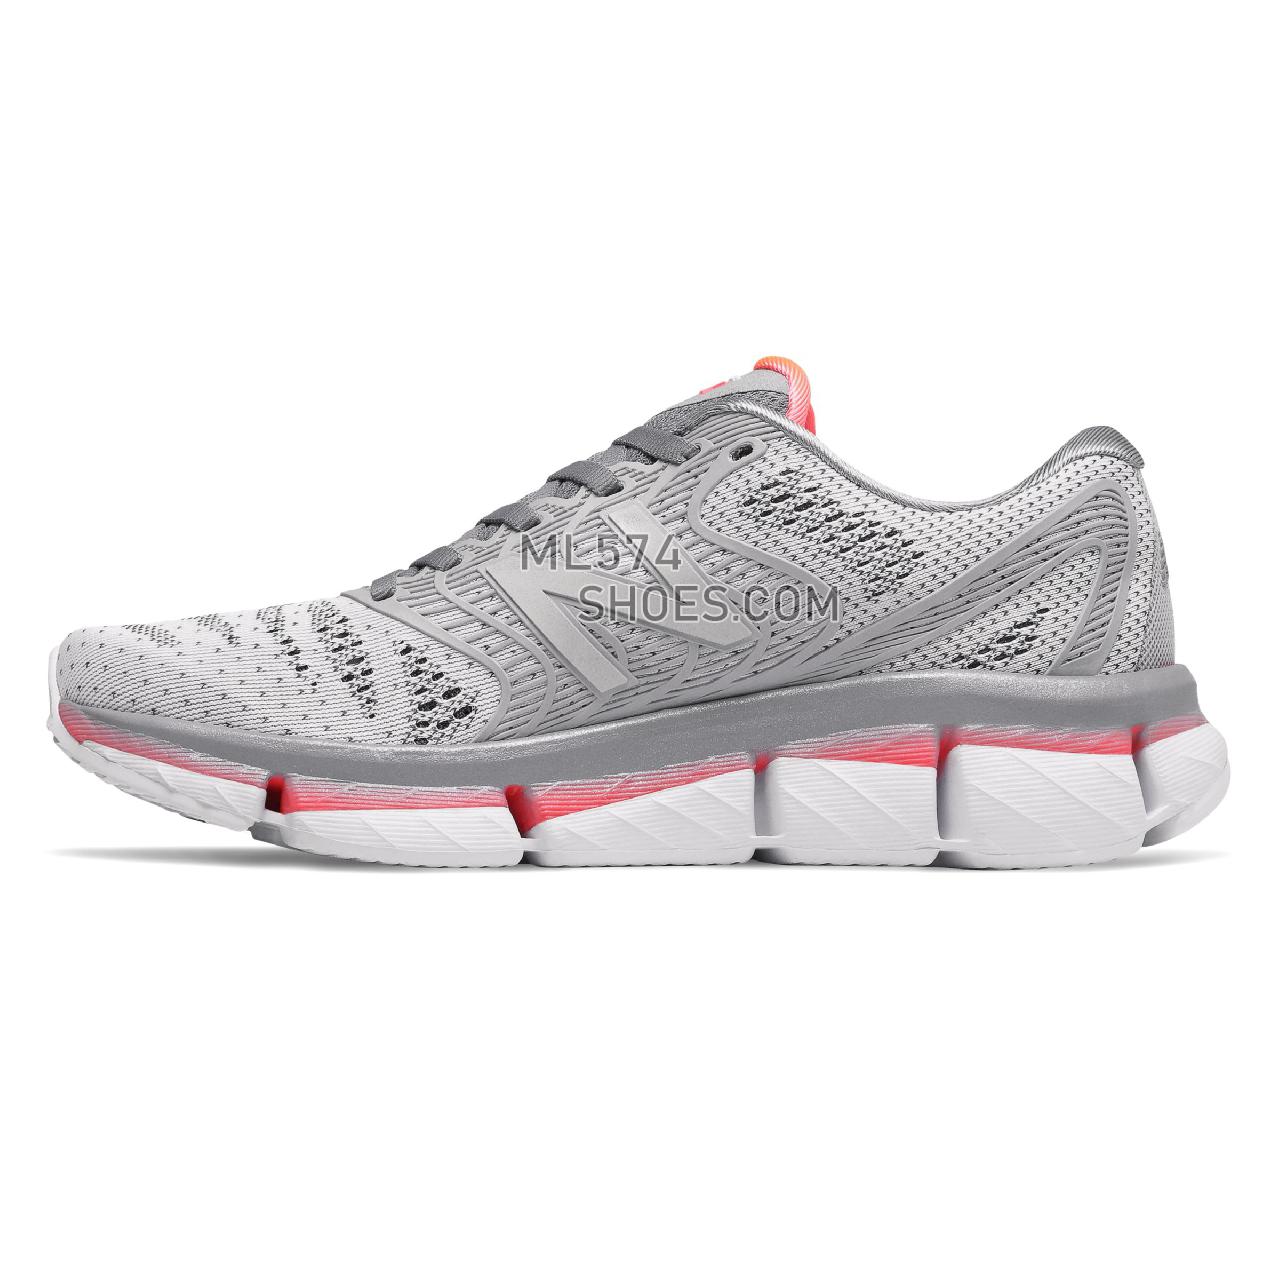 New Balance Rubix - Women's Stability Running - White with Steel and Guava - WRUBXWG